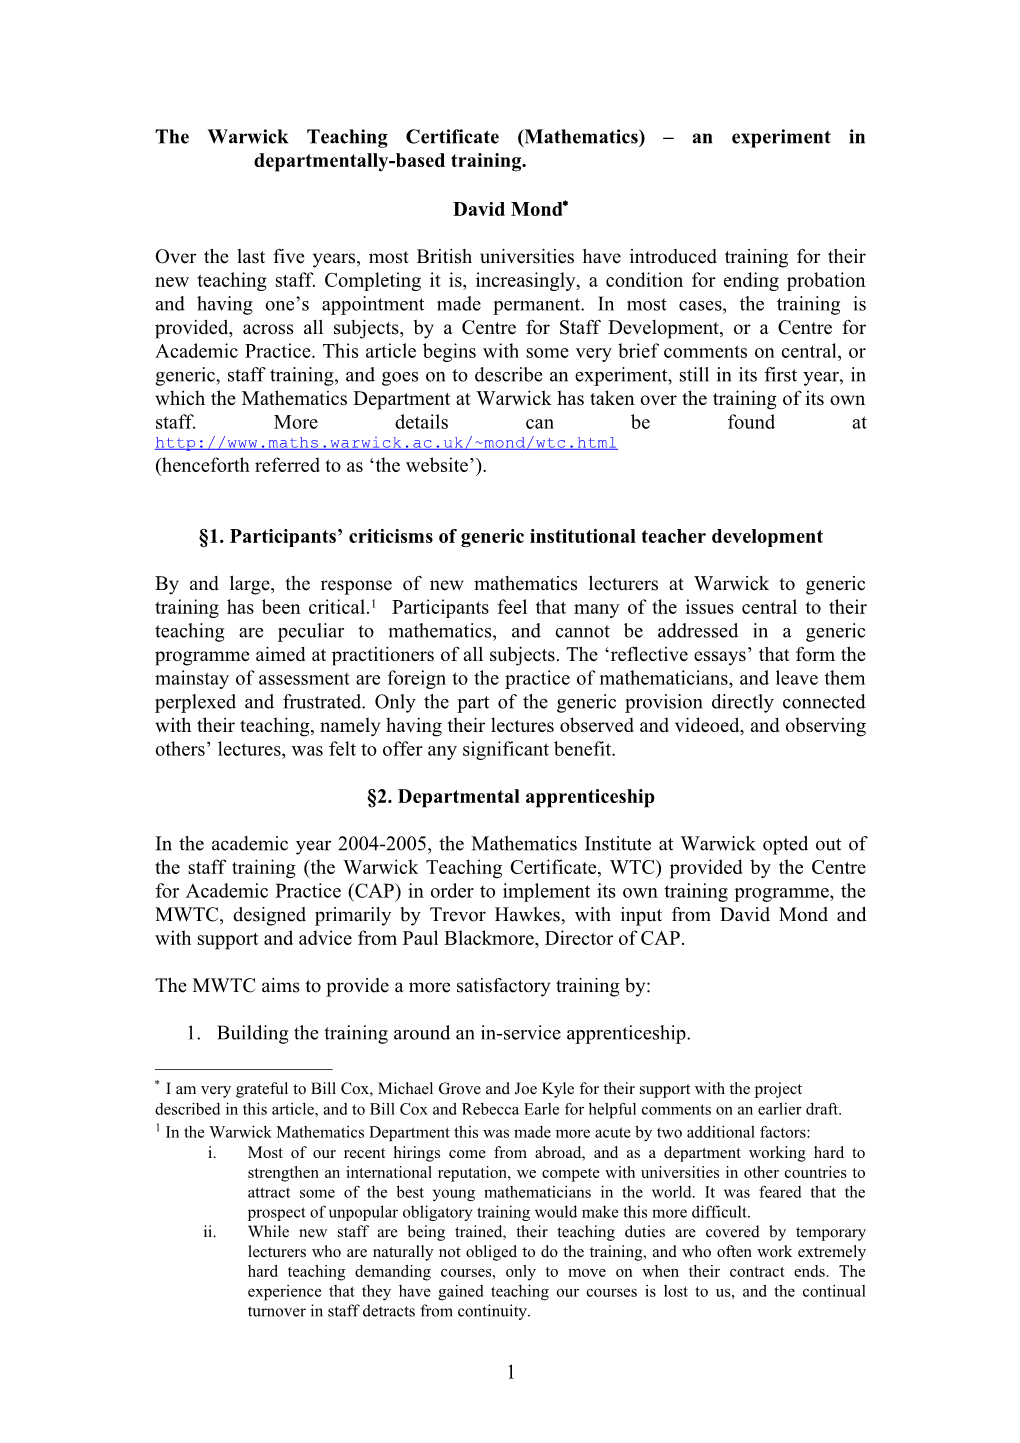 The Warwick Teaching Certificate (Mathematics) an Experiment in Departmentally-Based Training